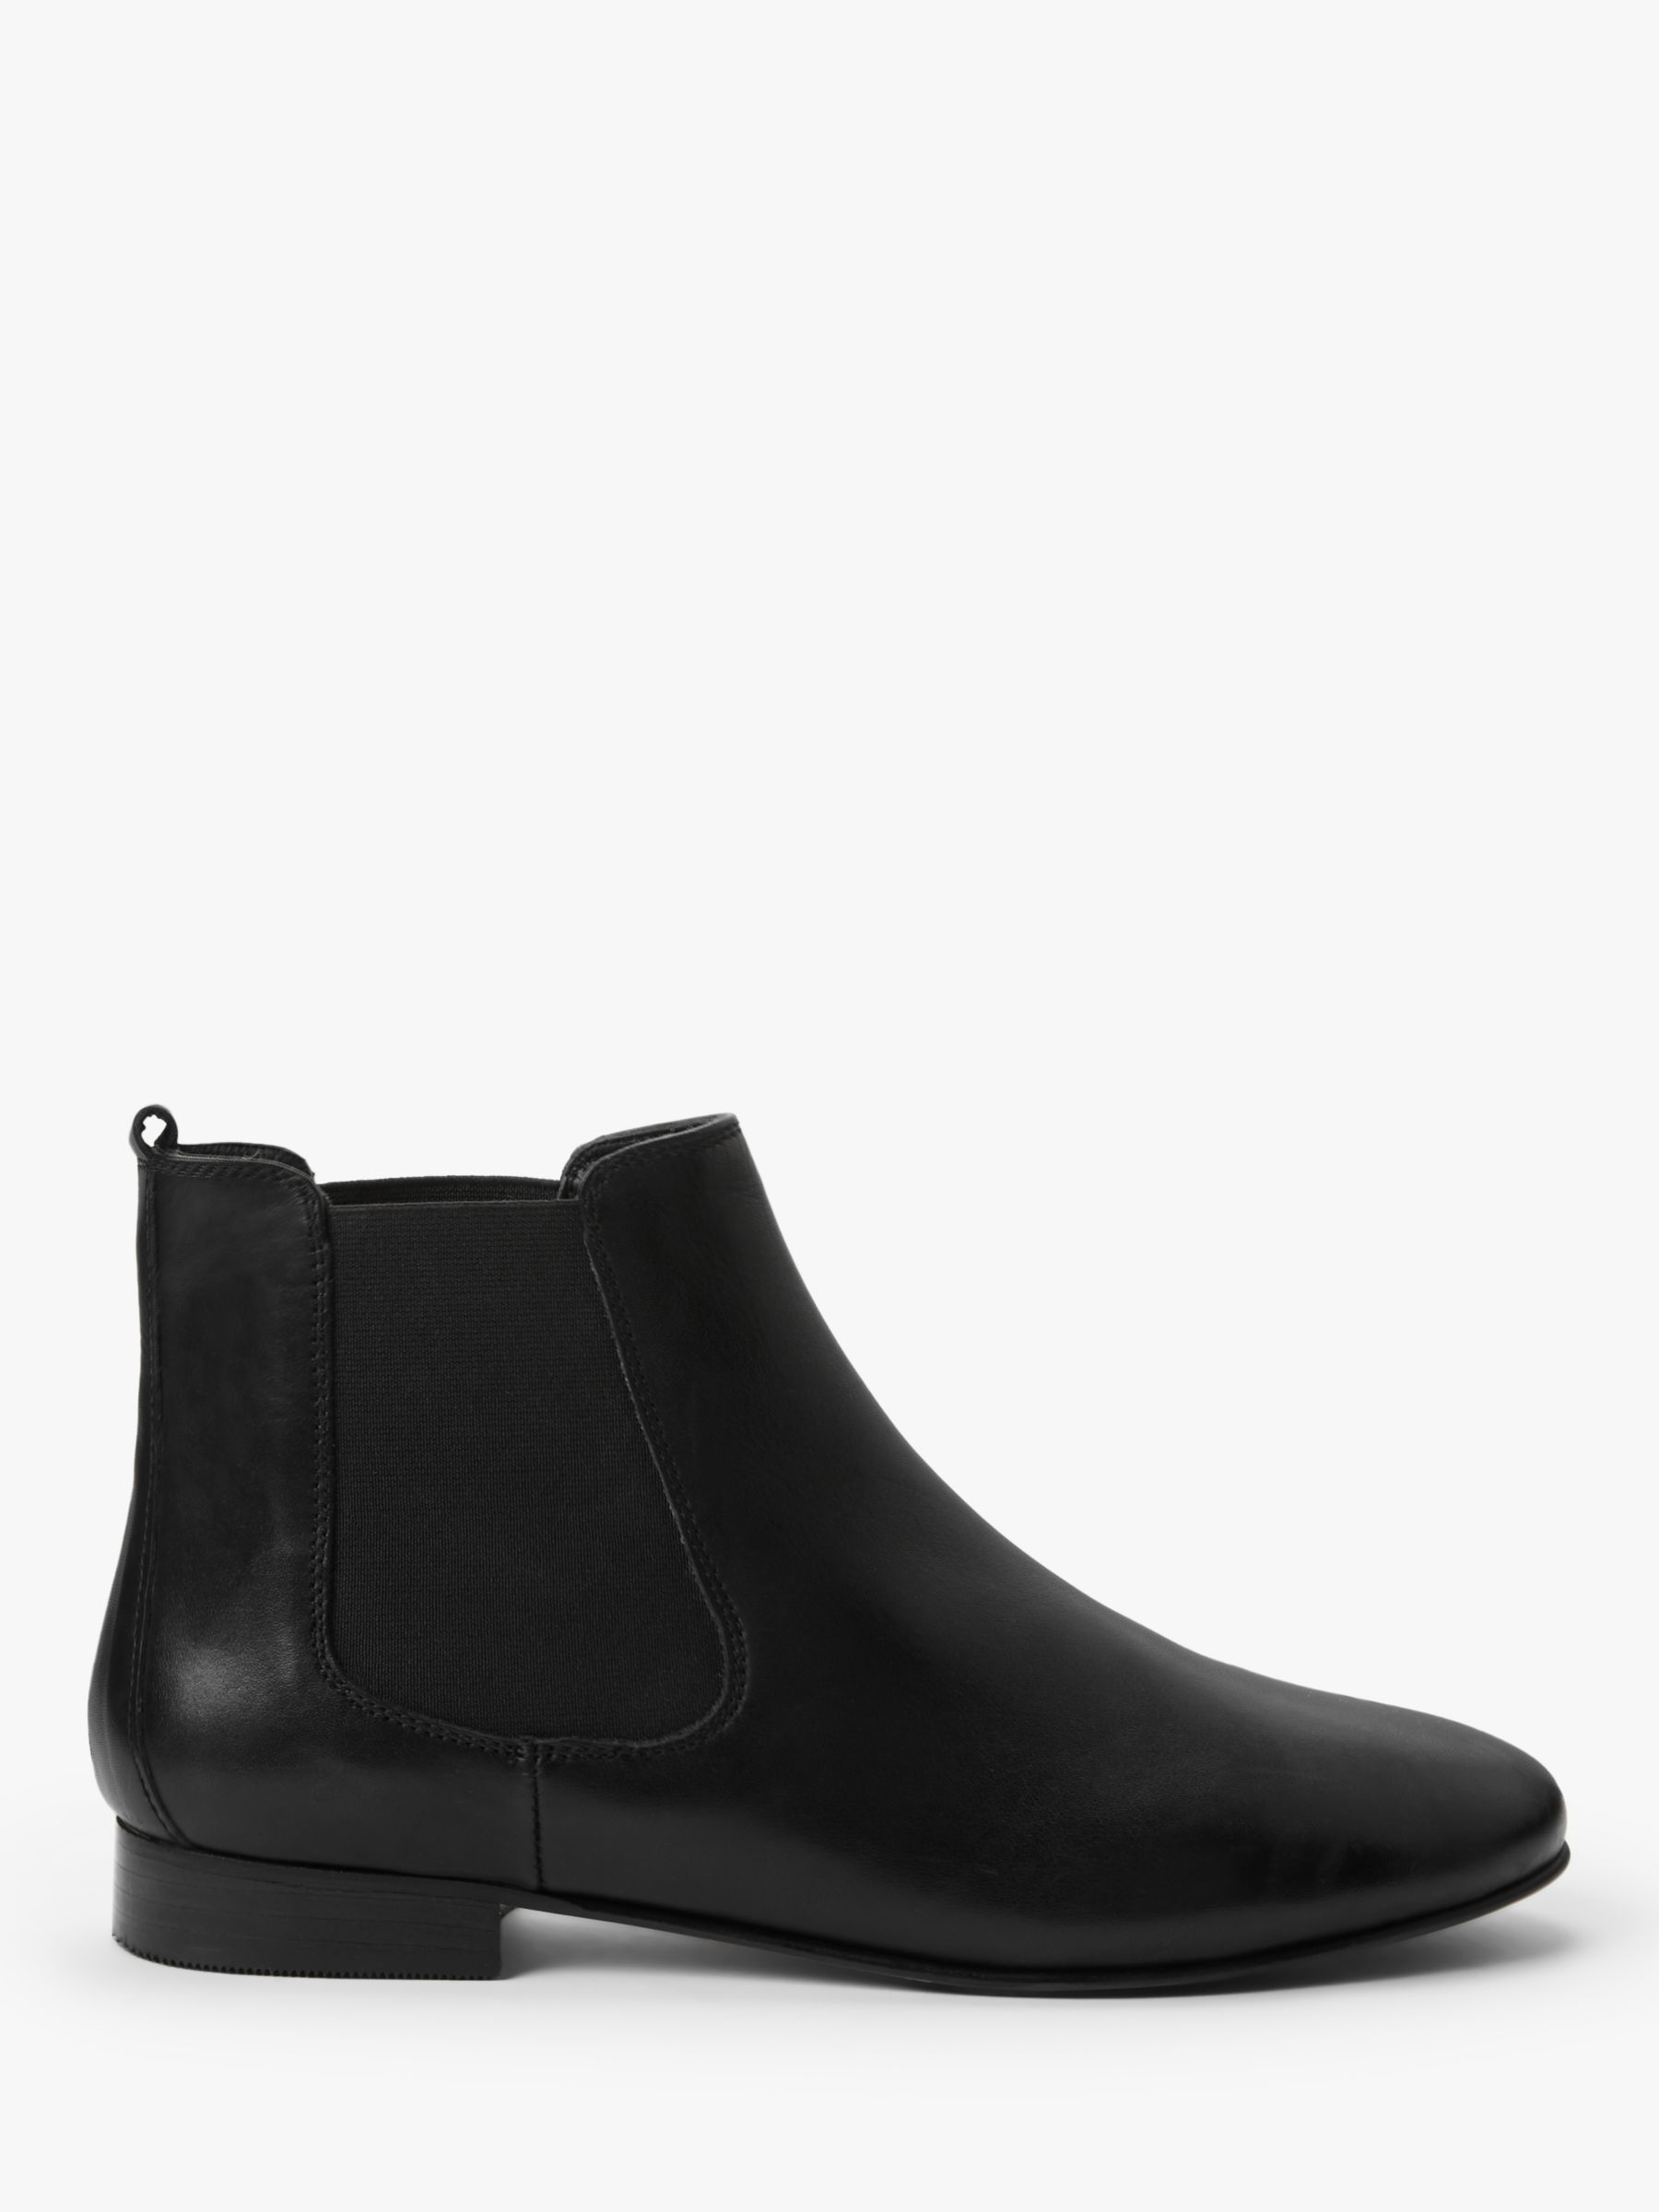 Boden Leaton Leather Chelsea Ankle Boots